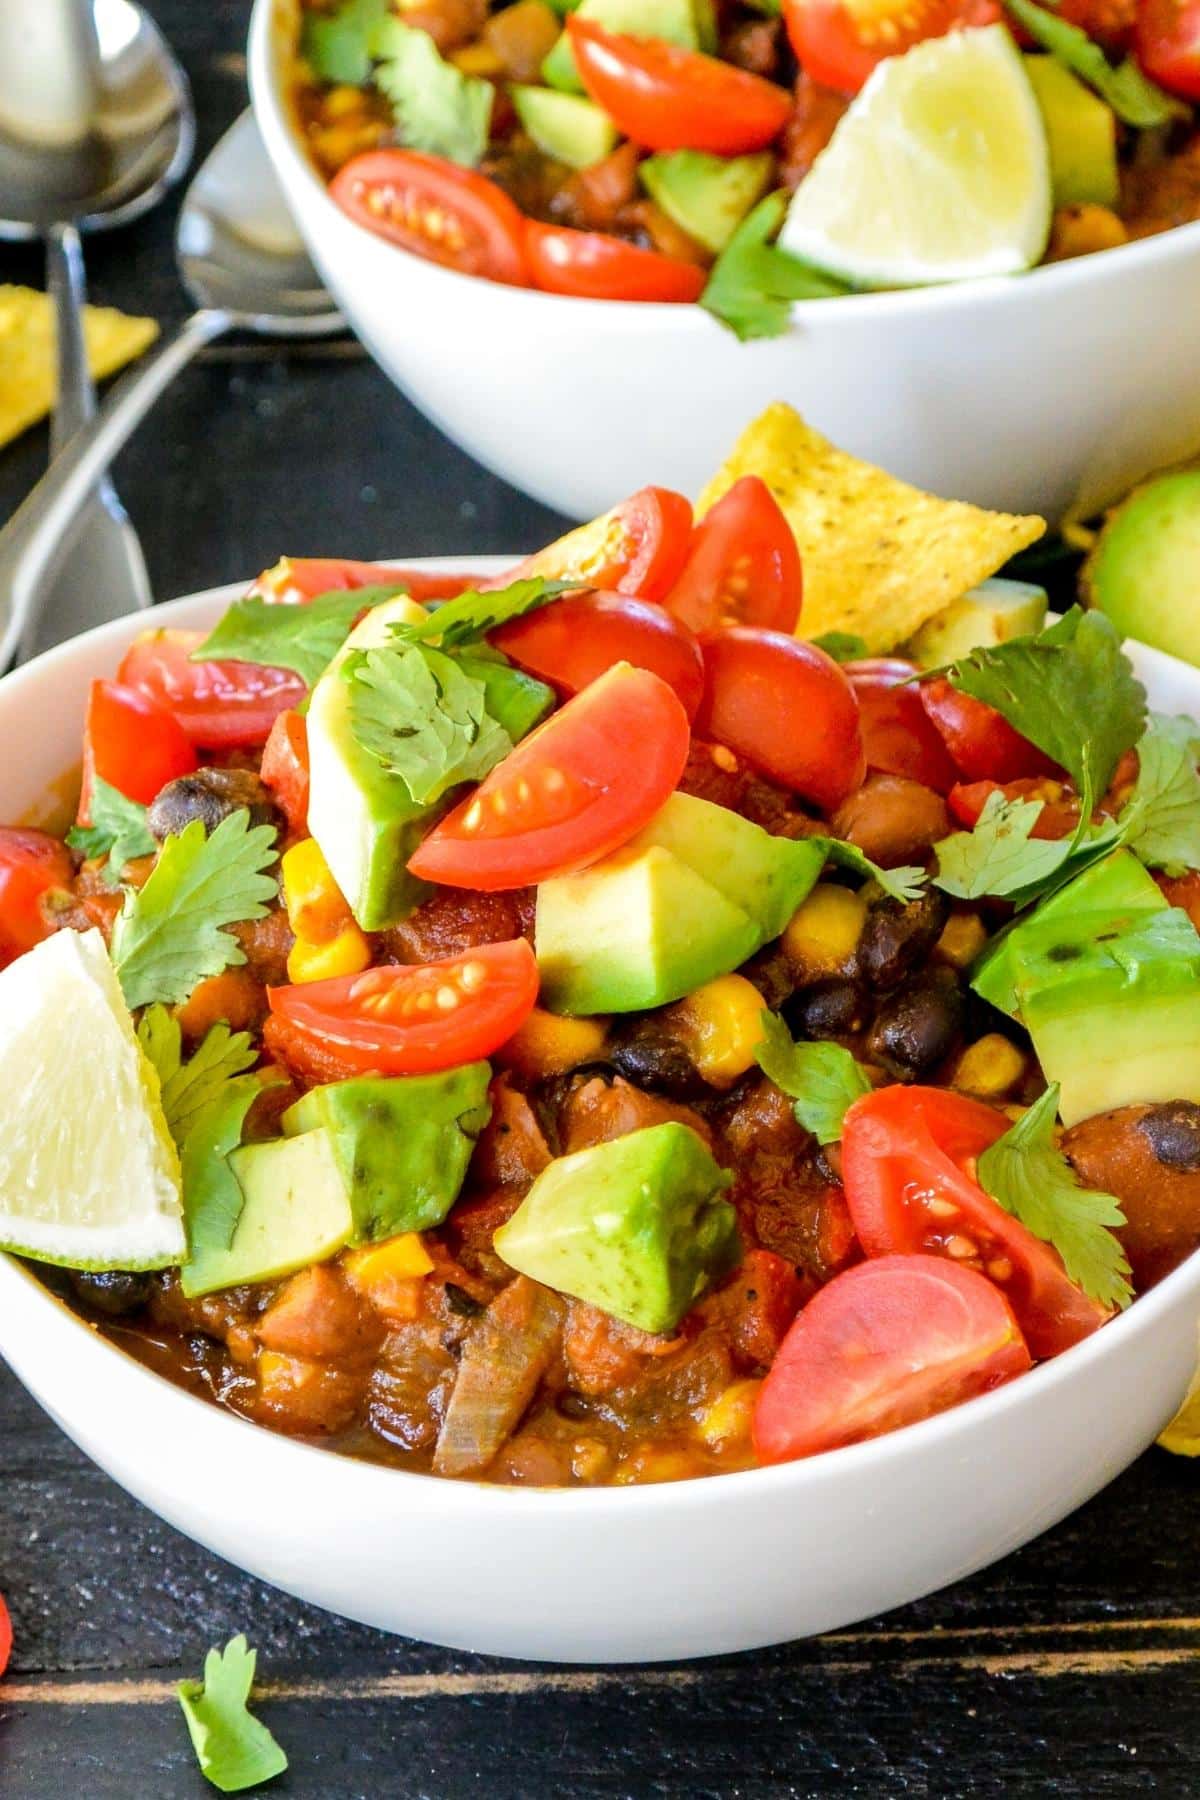 Bowls of chili topped with avocado cubes, quartered cherry tomatoes, and fresh cilantro leaves.